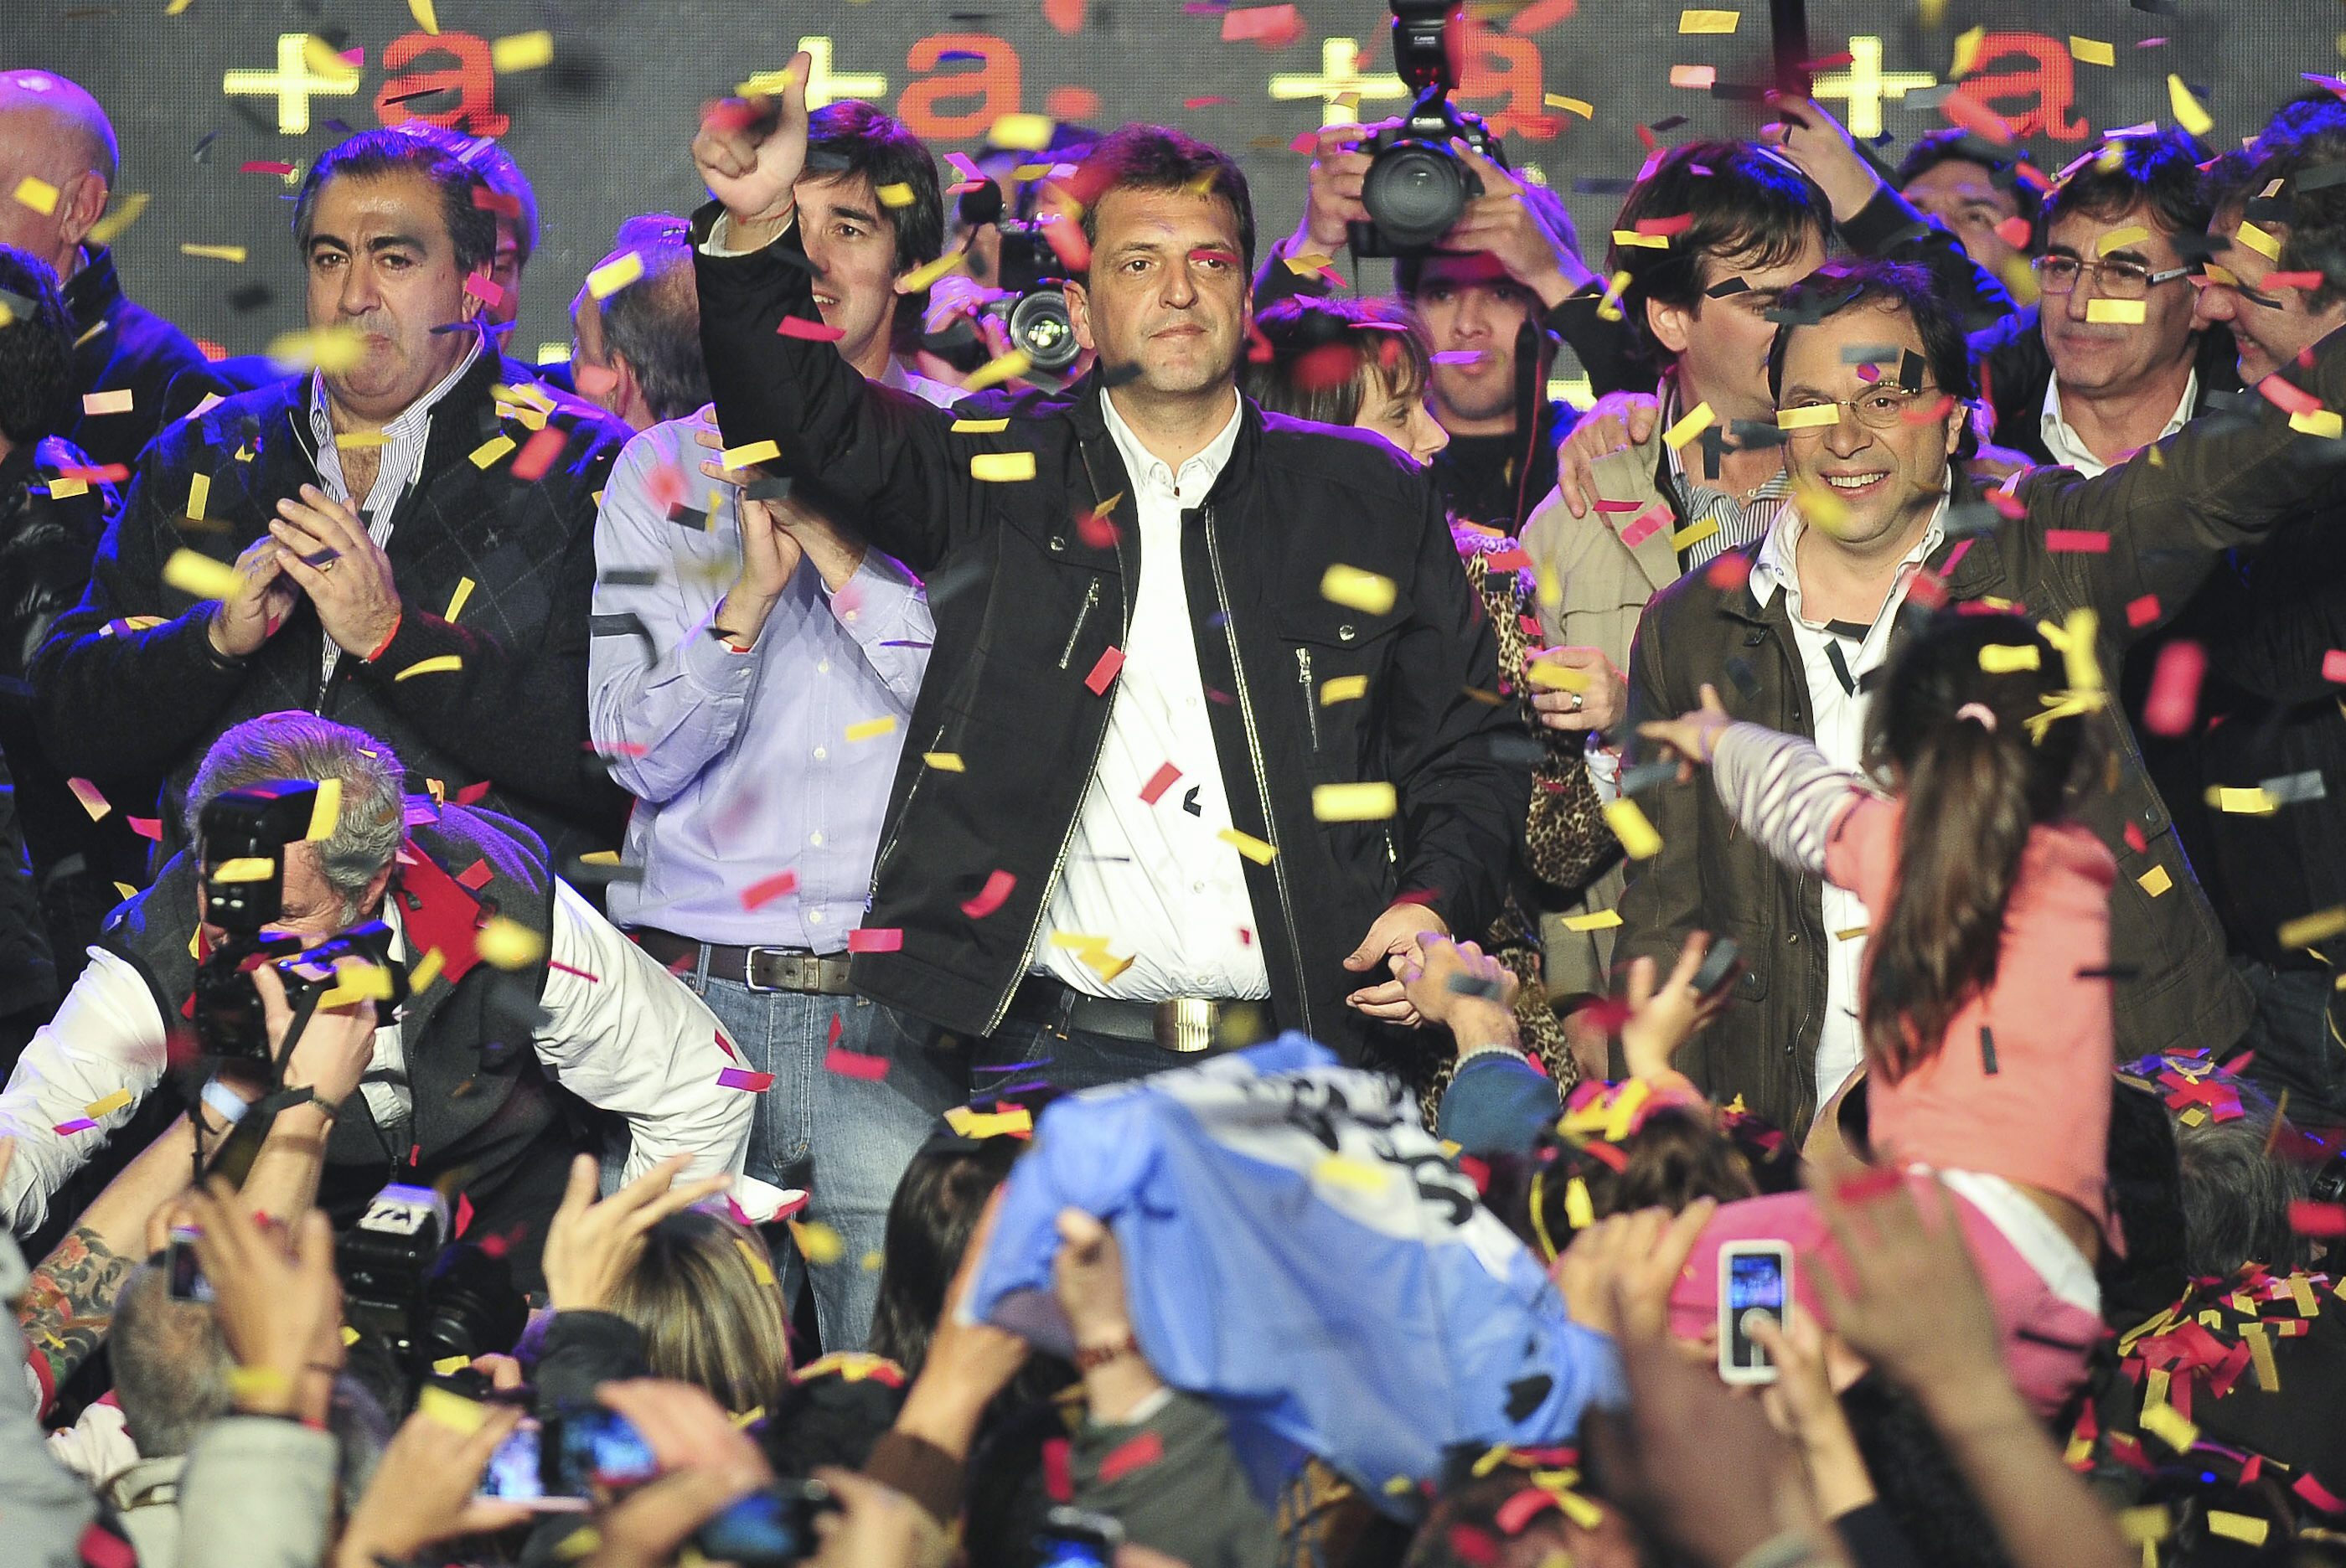 Justicialist Party opposition candidate Sergio Massa celebrates the electorate results. Photo: EPA